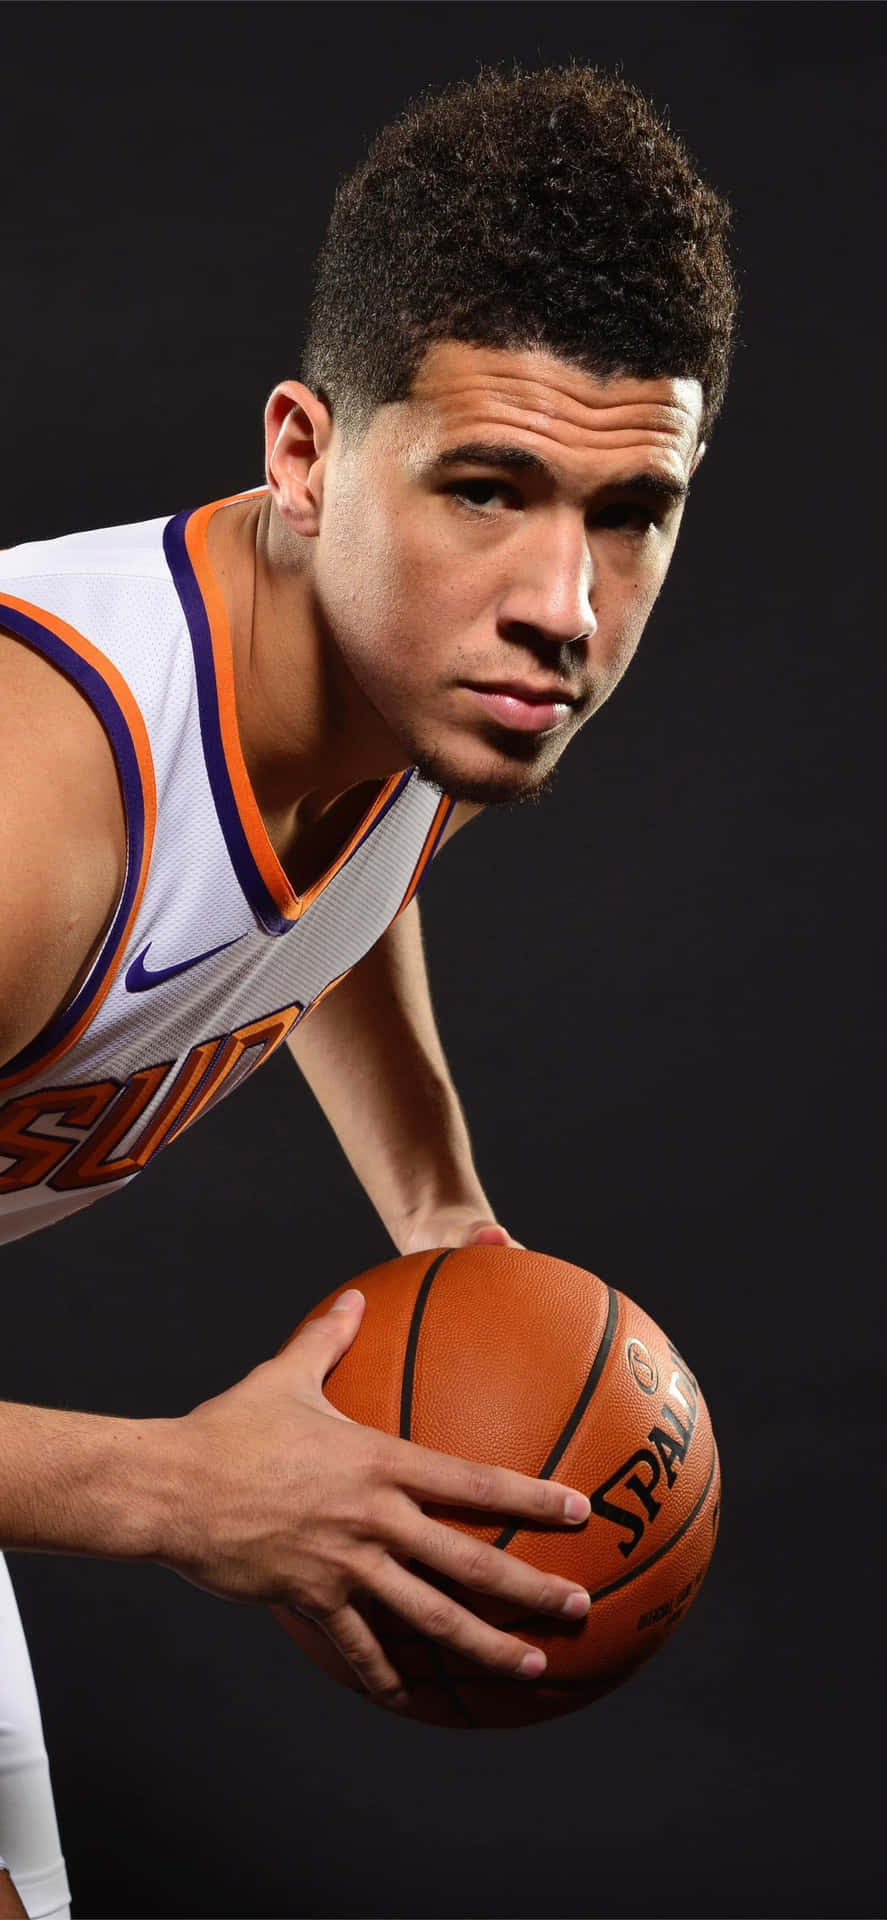 Phoenix Suns Star, Devin Booker, and His iPhone Wallpaper